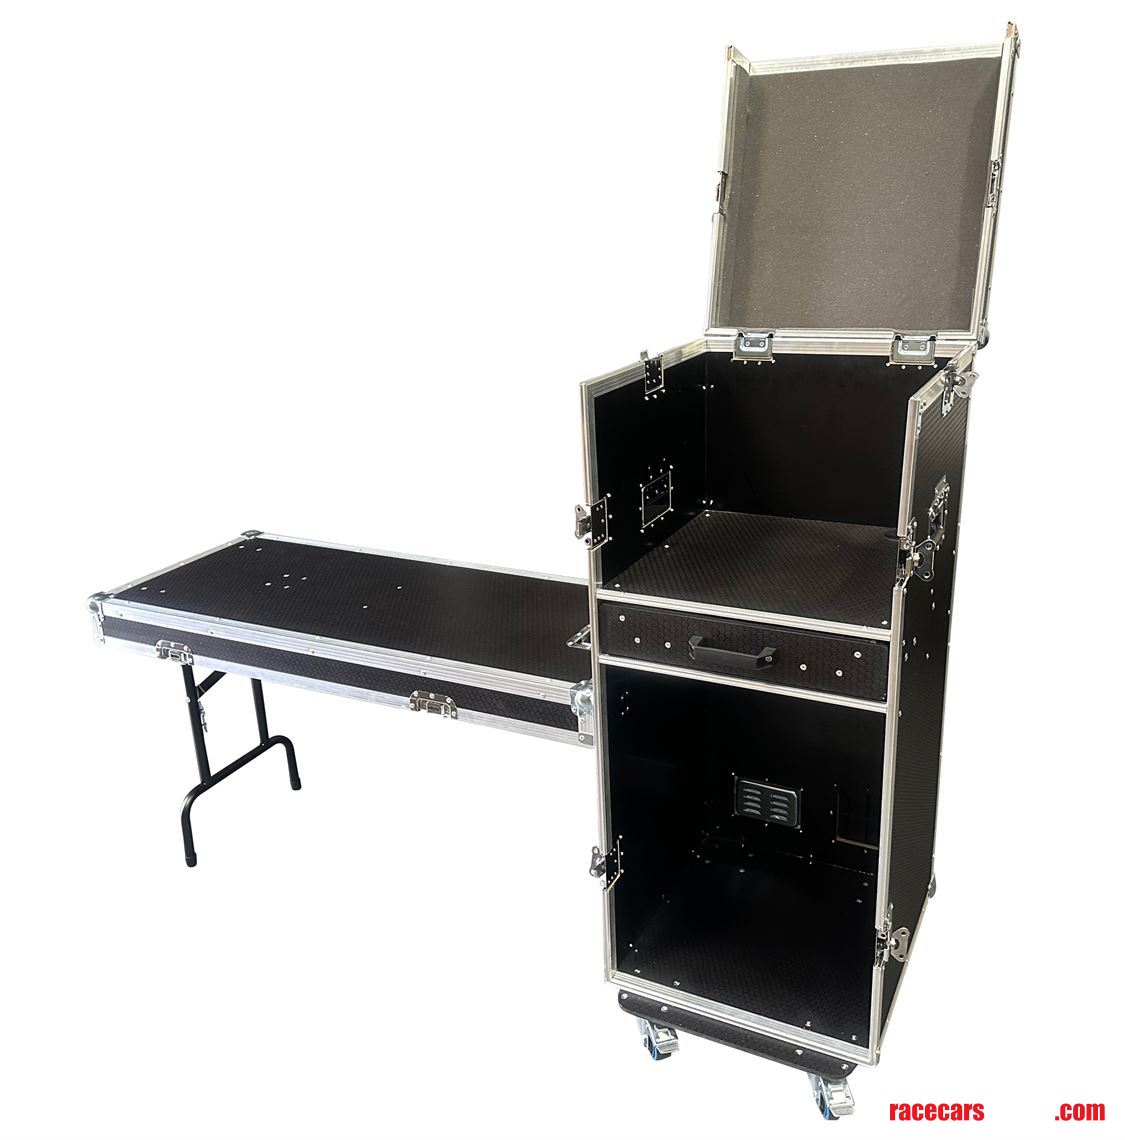 small-hospitality-with-side-table---vme-hc26